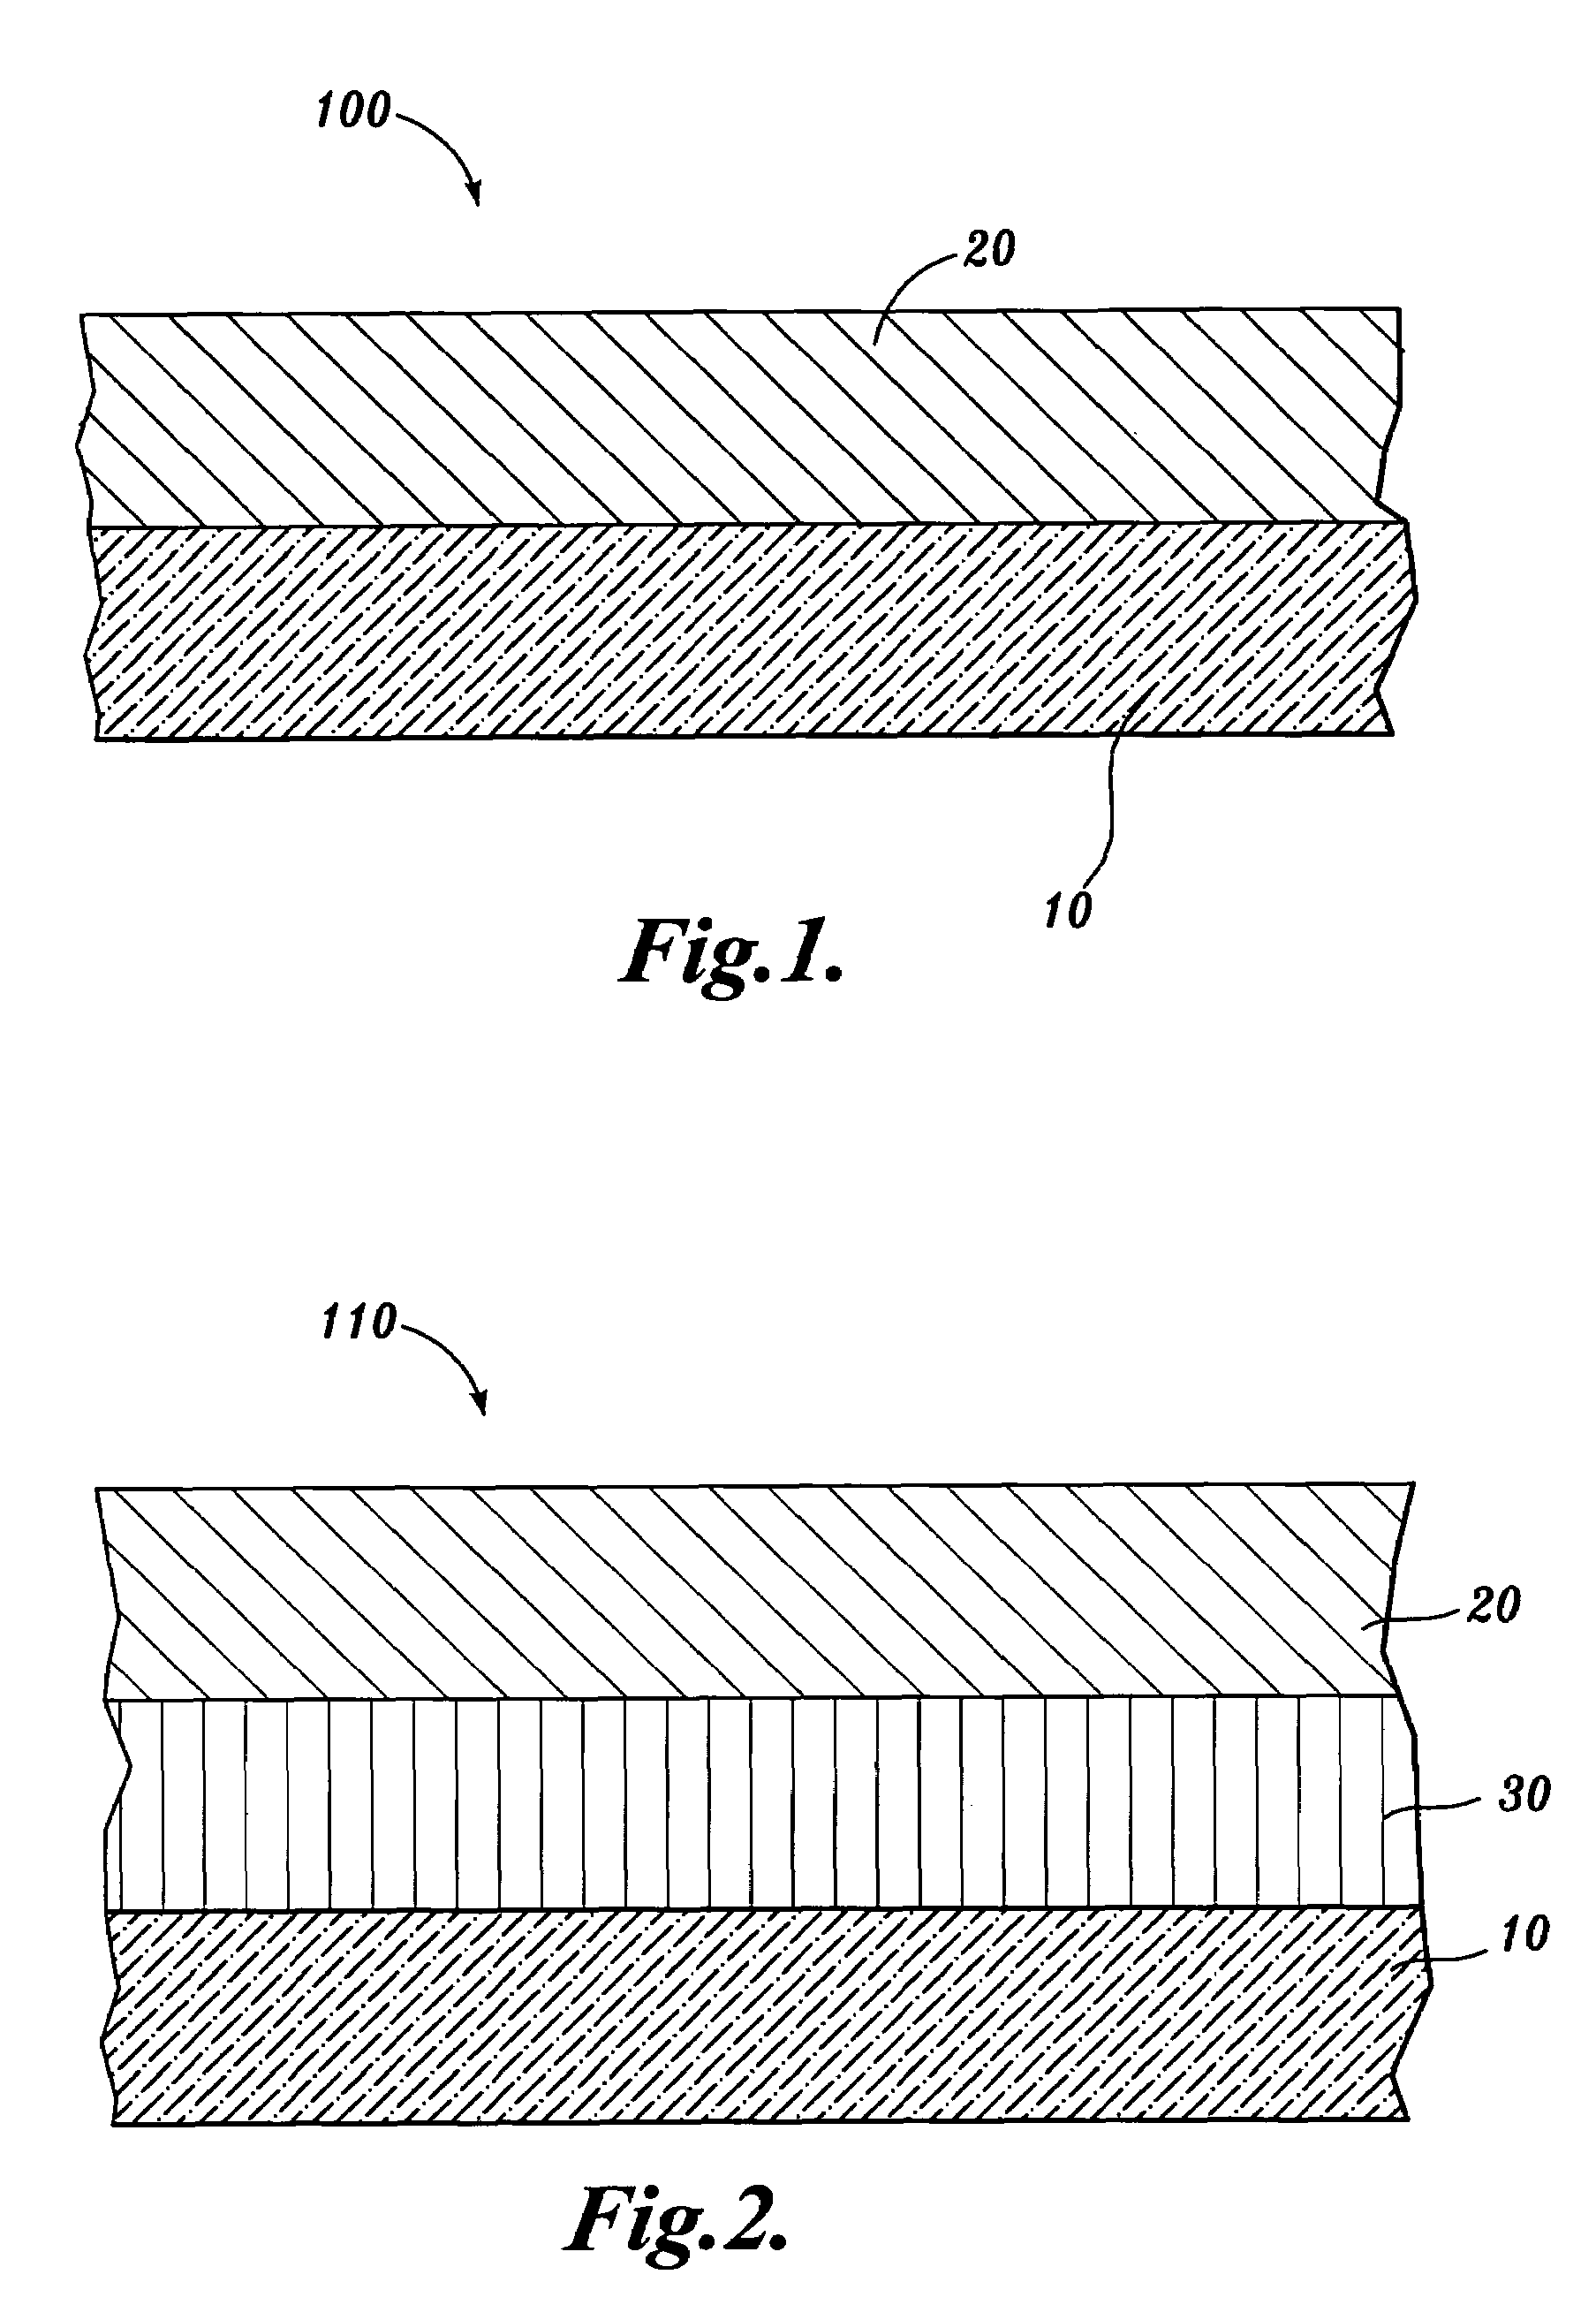 Method for making carboxyalkyl cellulose